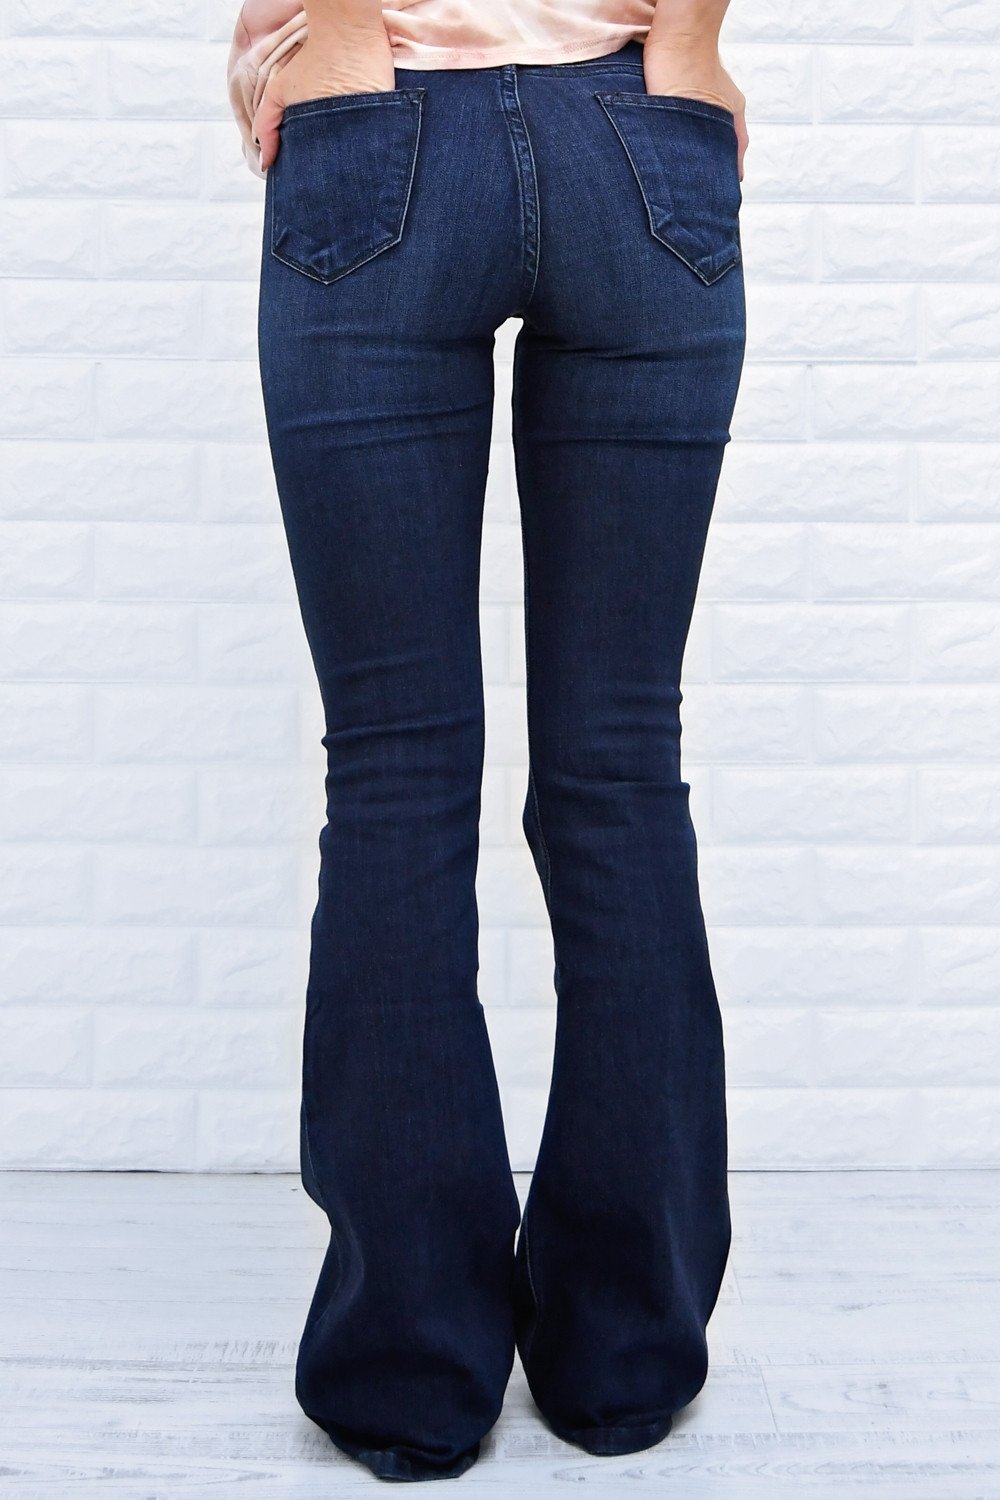 Must Have Dark Flare Jeans - Kan Can